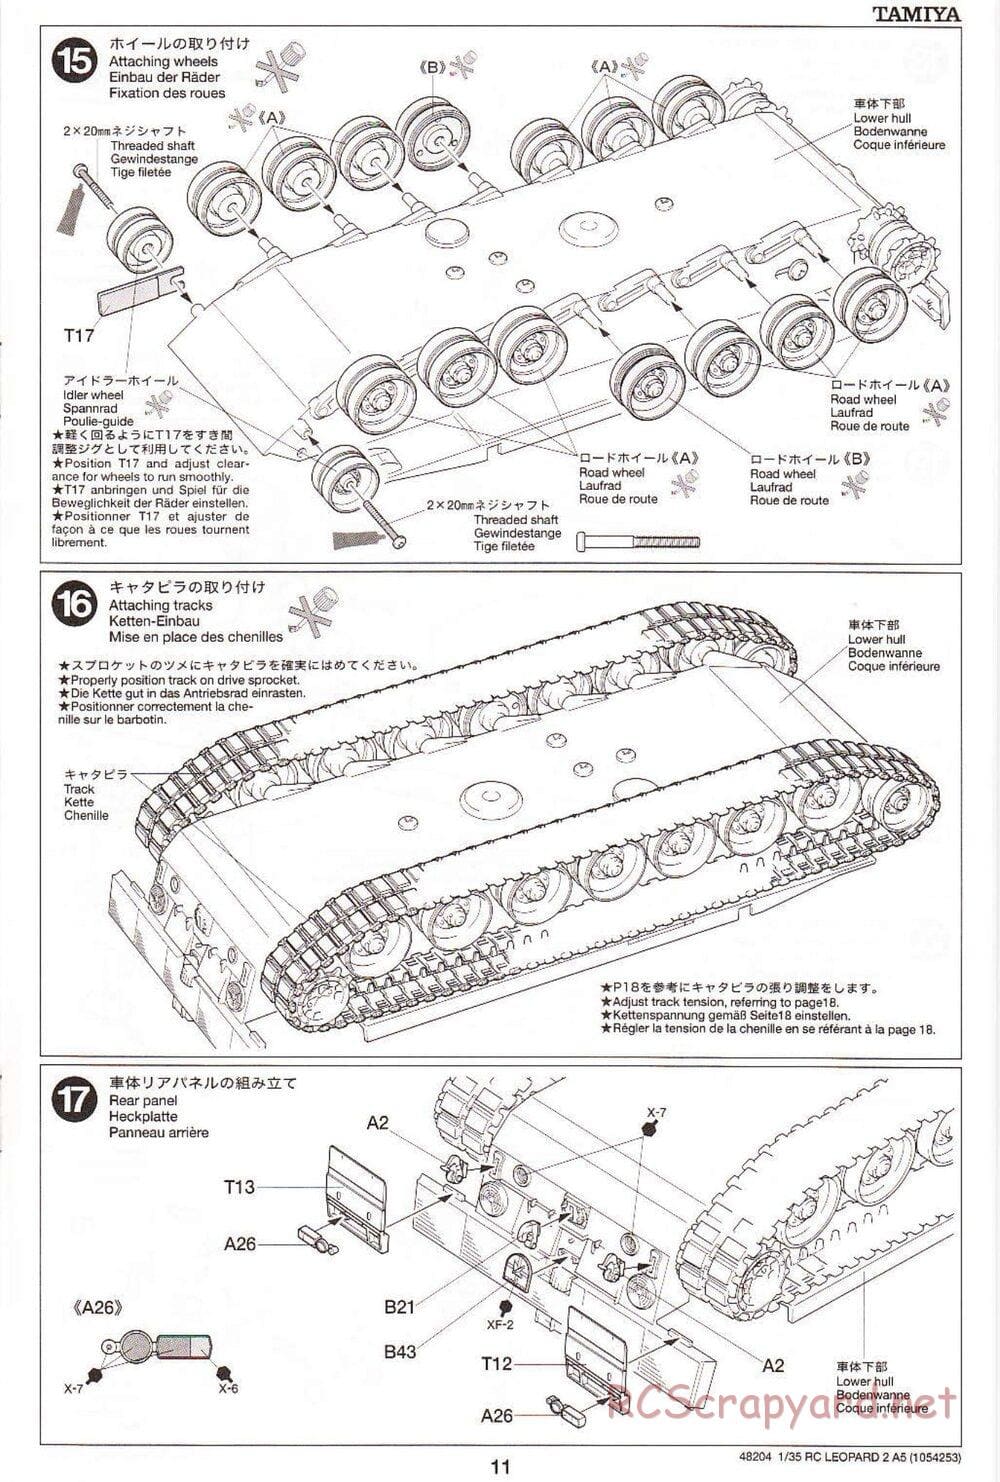 Tamiya - Leopard 2 A5 Main Battle Tank - 1/35 Scale Chassis - Manual - Page 11